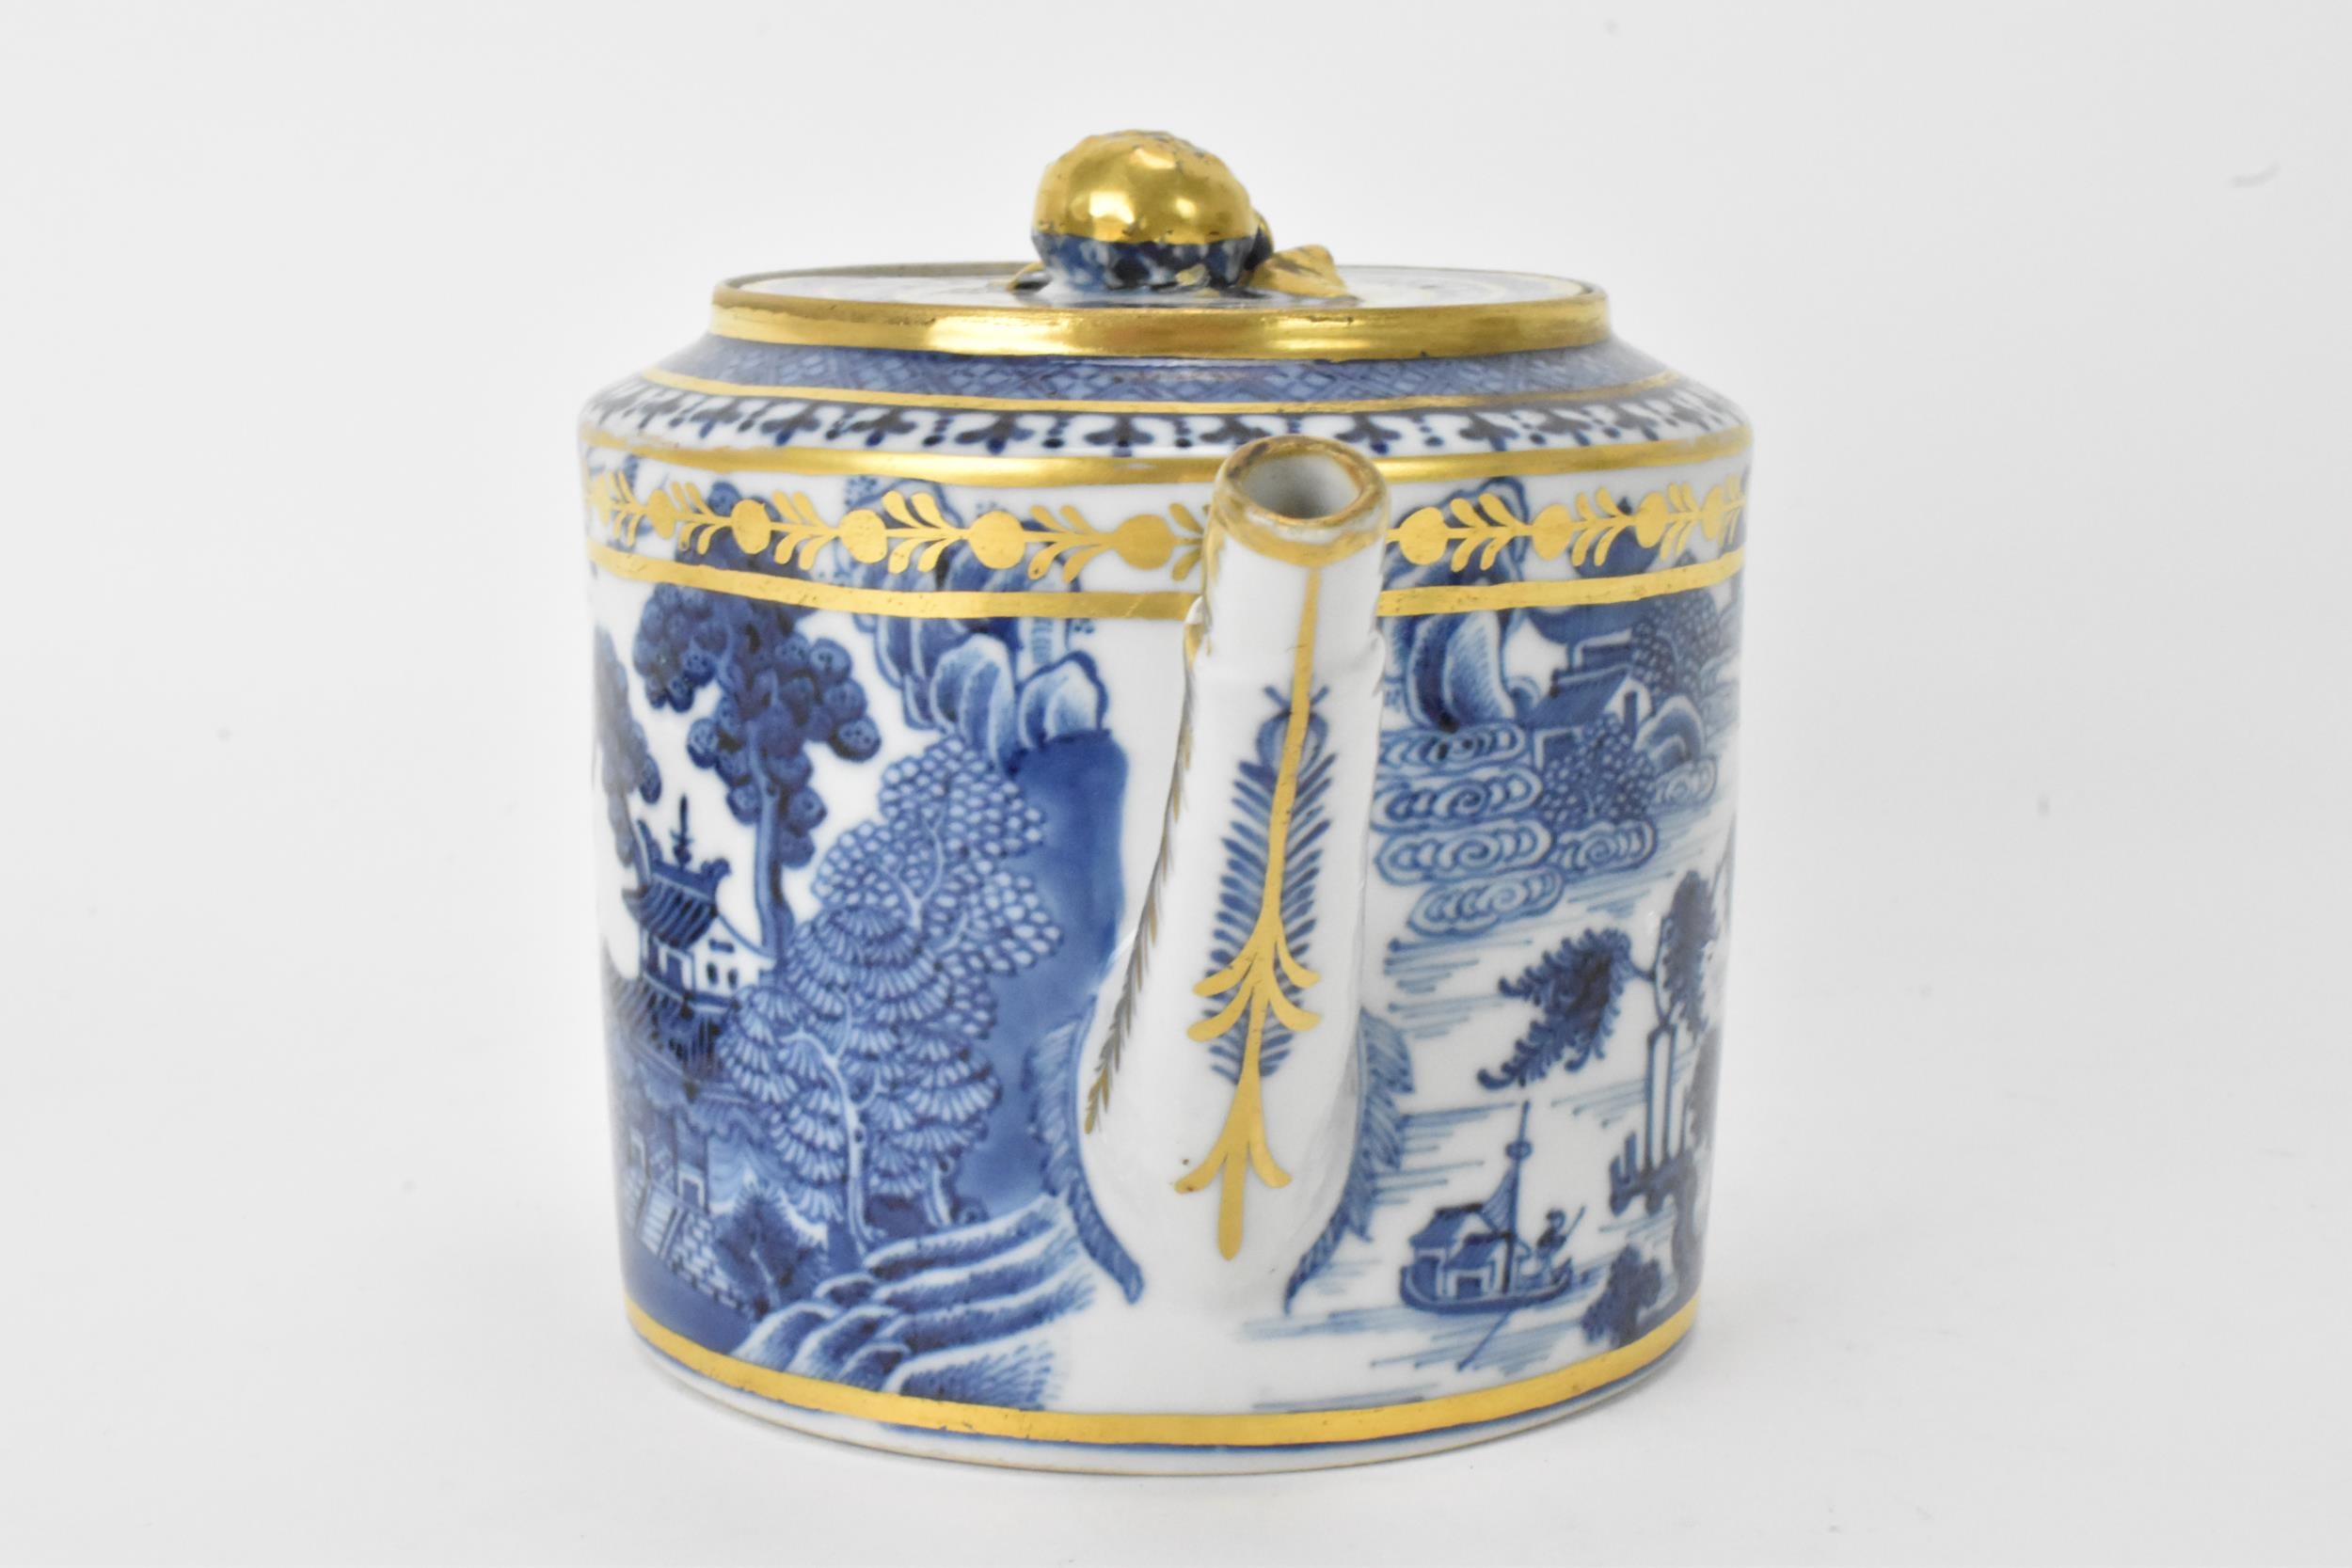 A Chinese export Qing dynasty blue and white teapot and stand, late 18th century, decorated with - Image 4 of 11